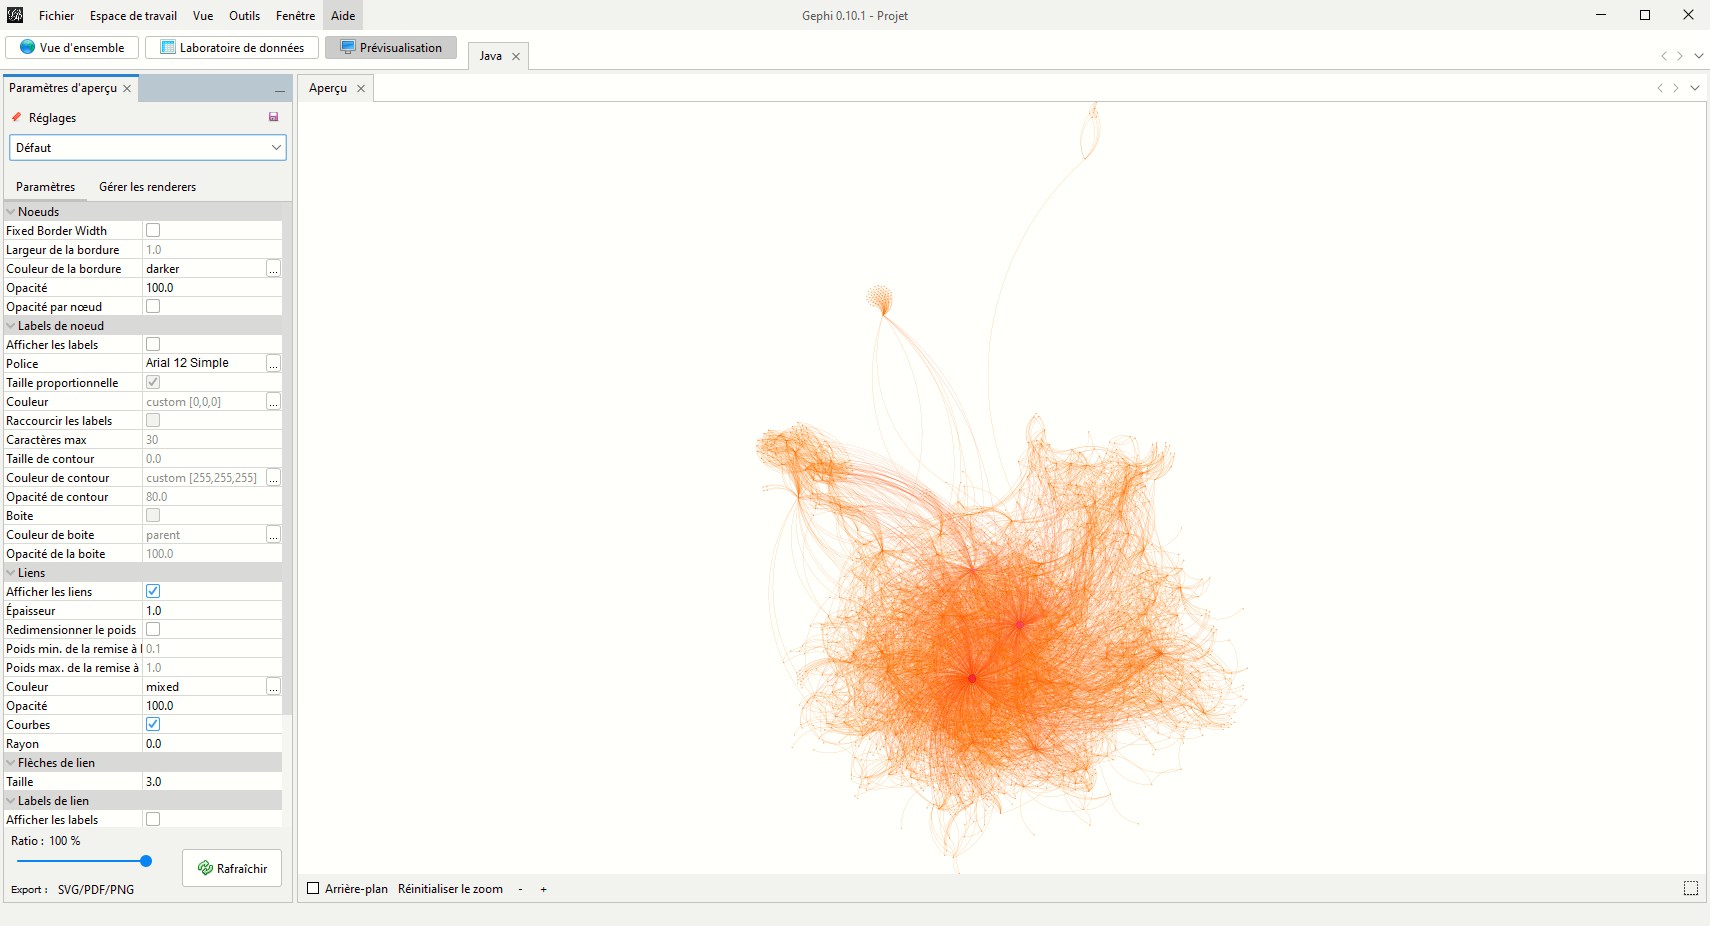 gephi_a.png